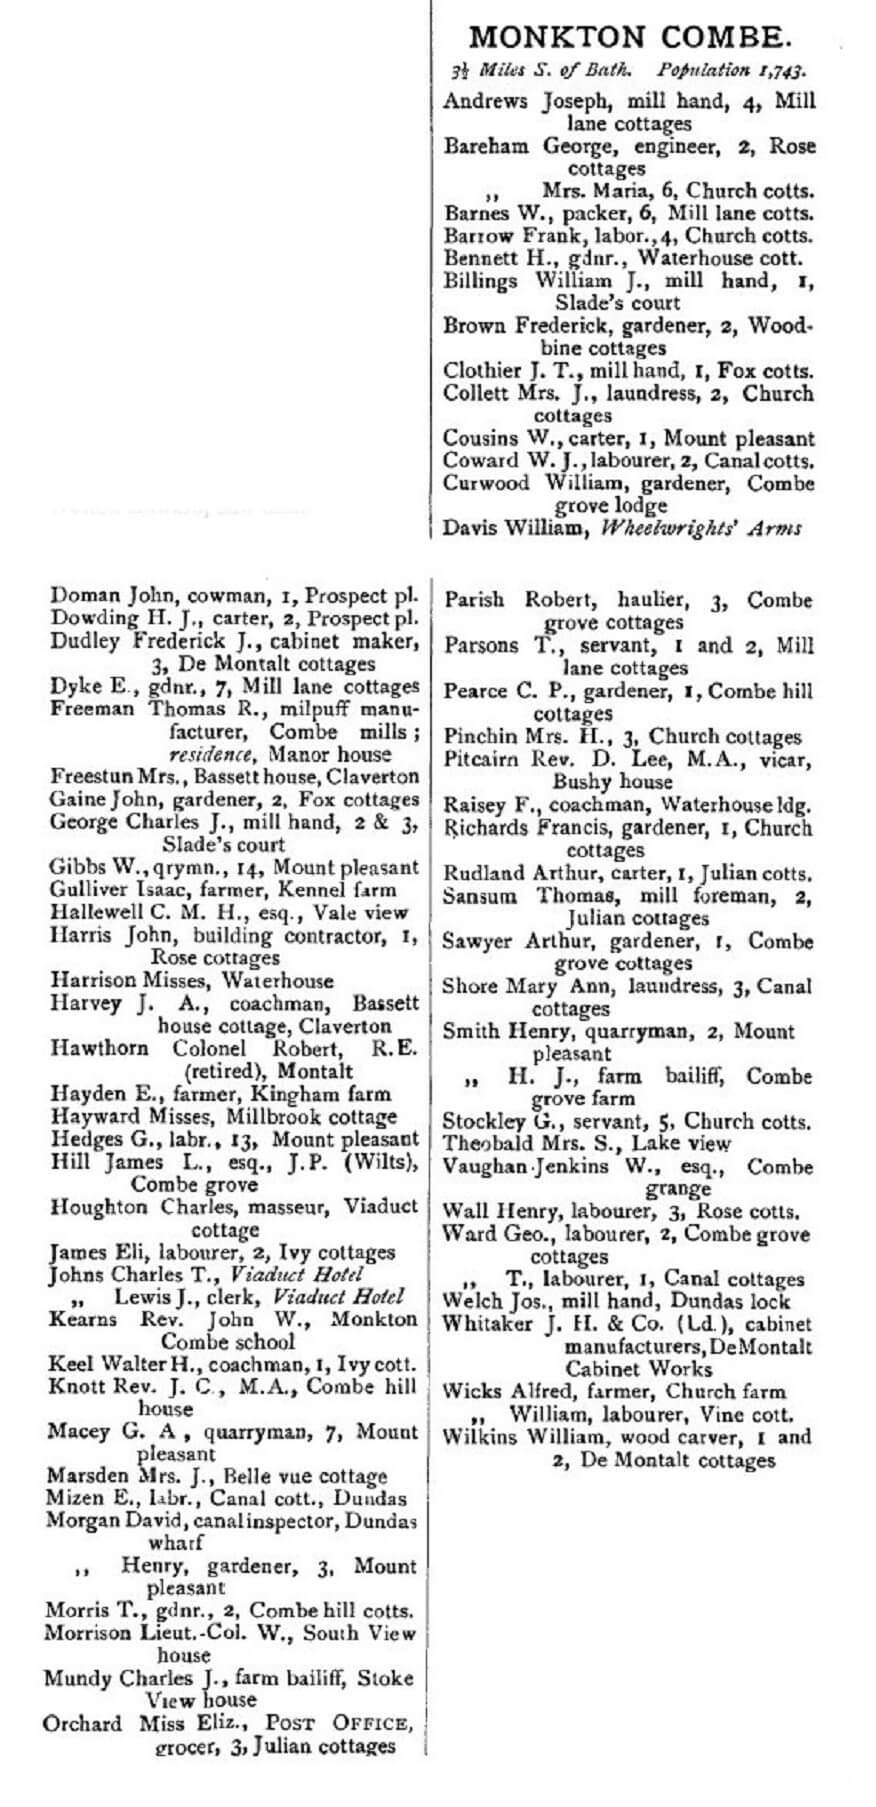 1902 Post Office Directory for Monkton Combe